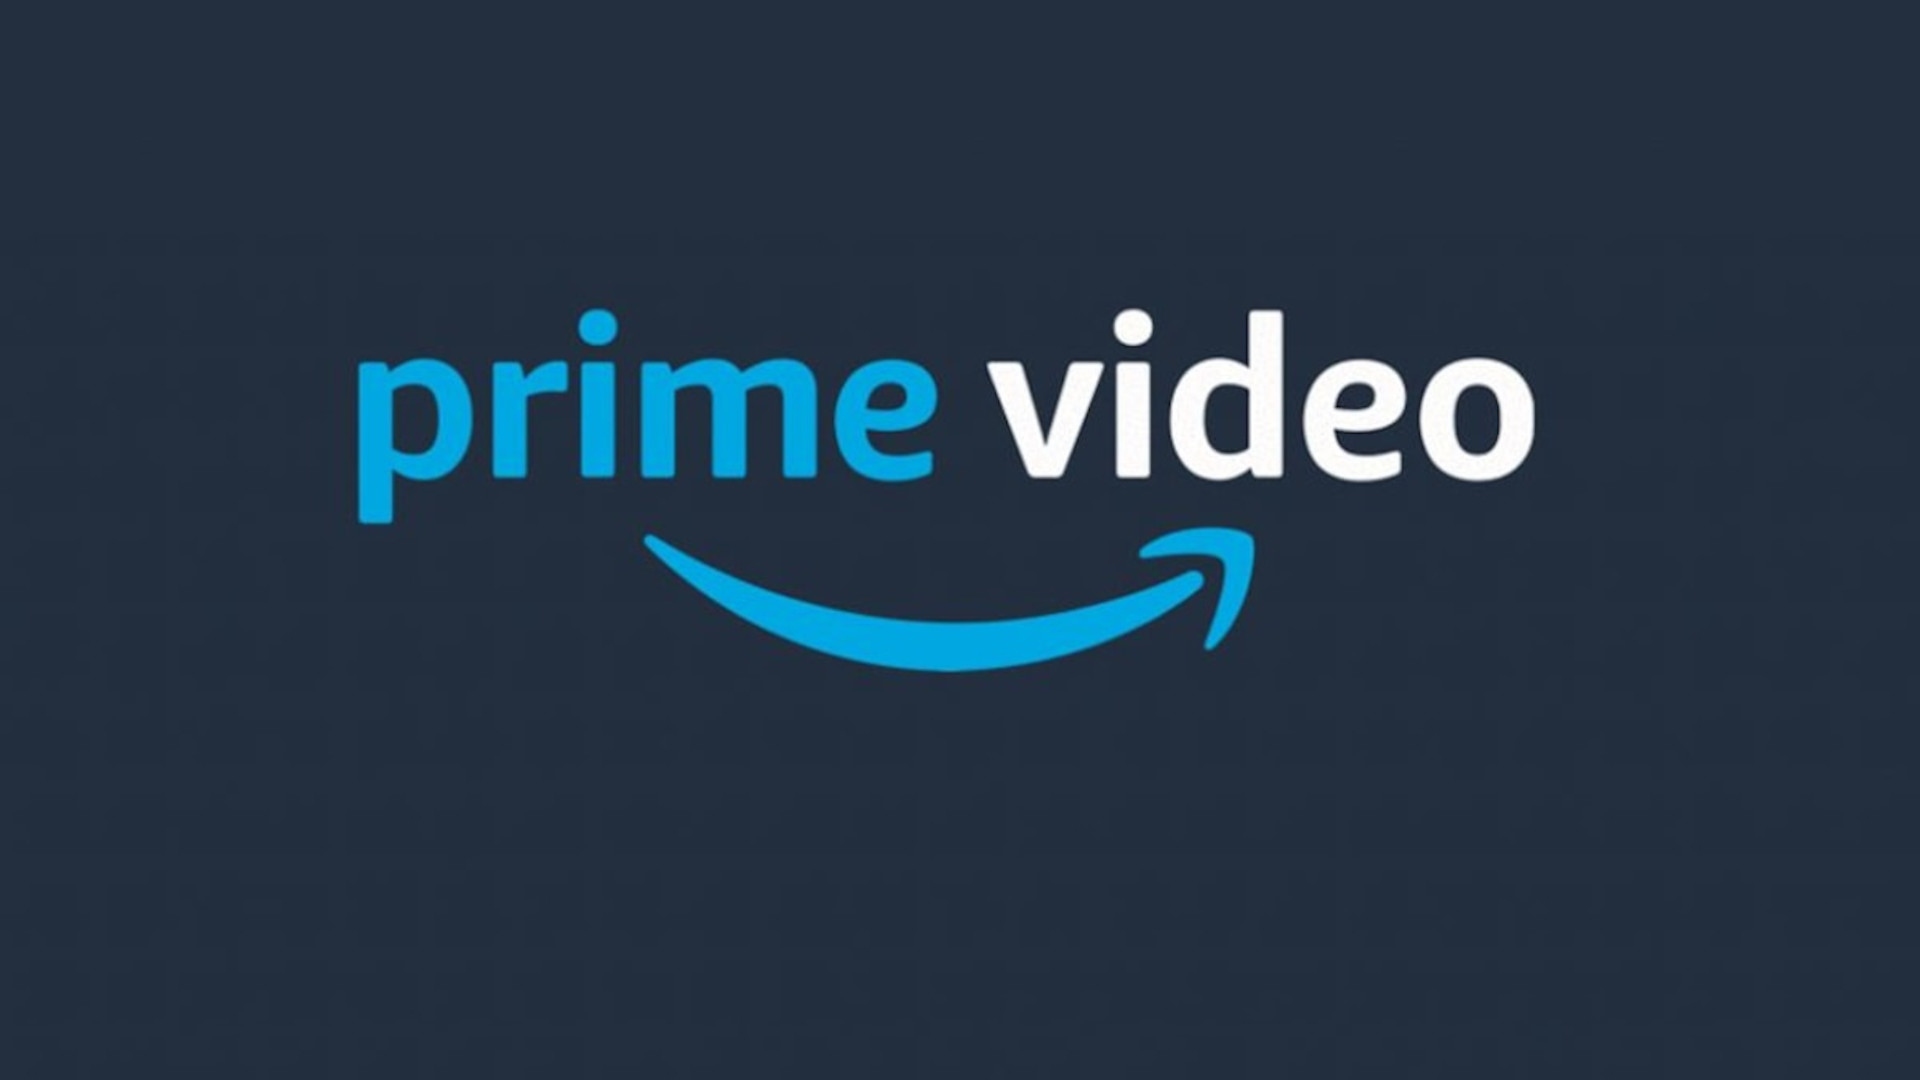 Best steaming service, Amazon Prime Video - its logo is on a plain background.